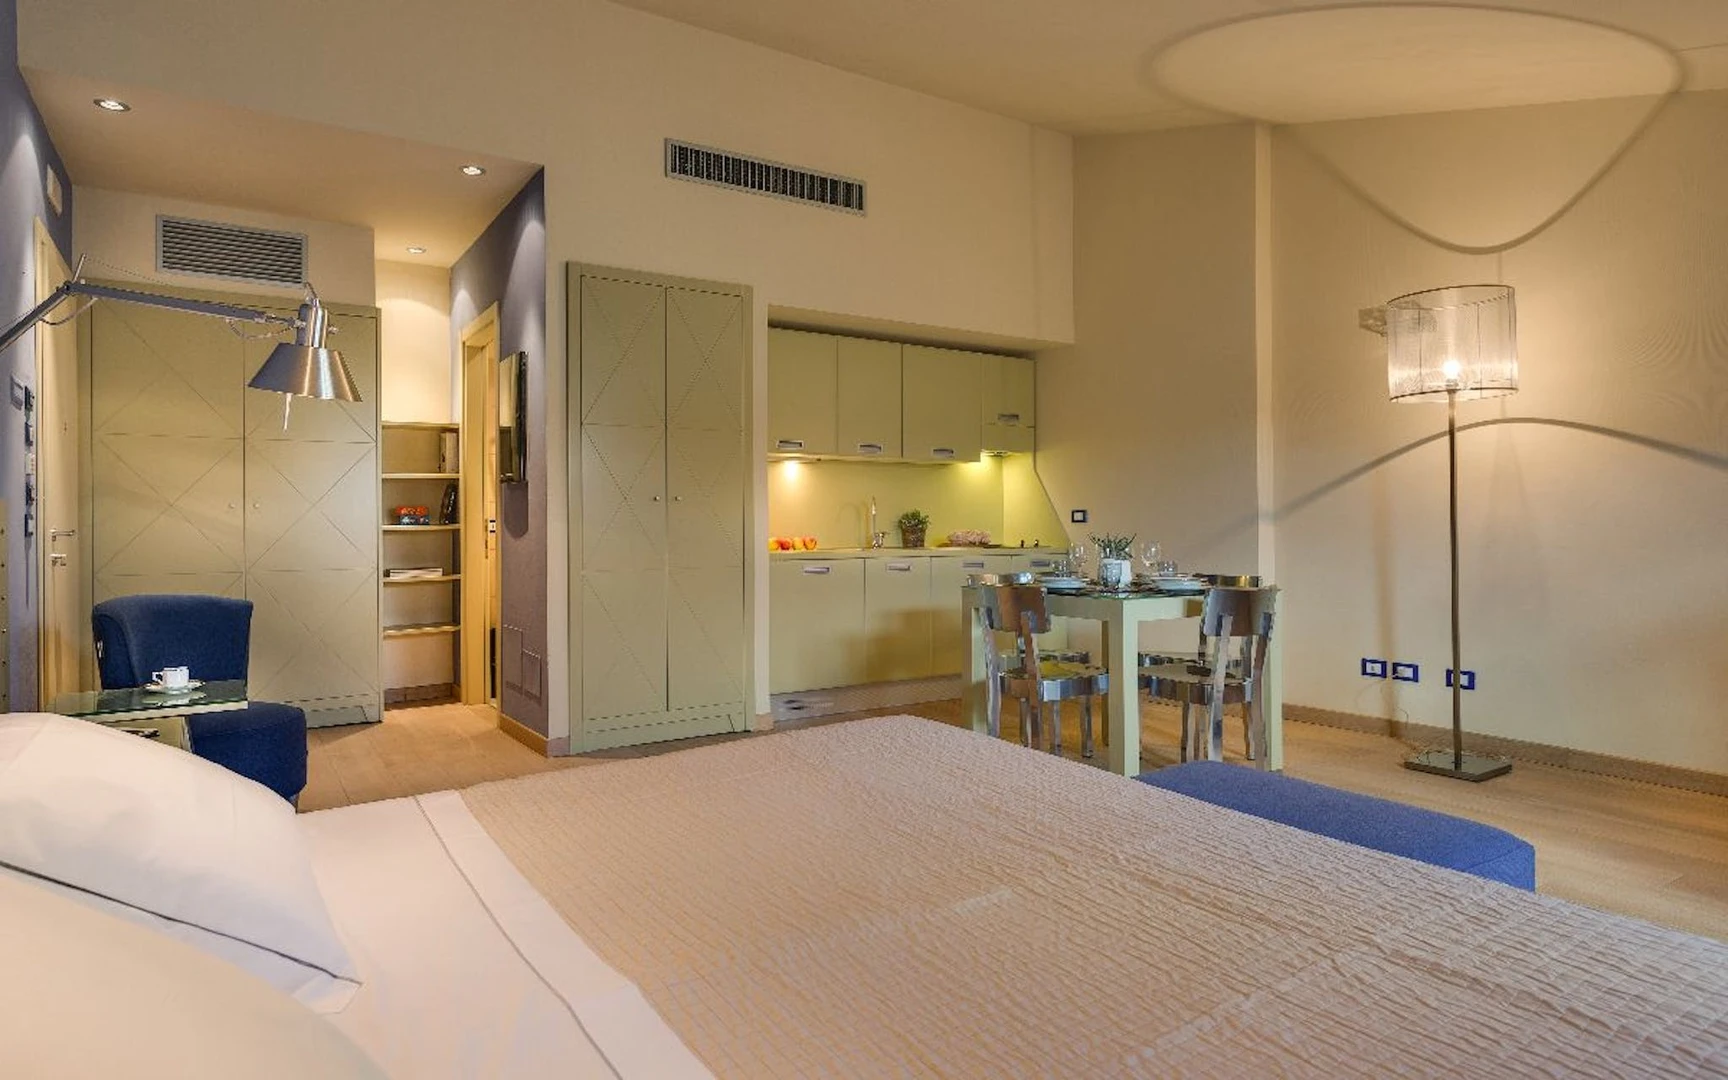 Accommodation with 3 bedrooms in Florence